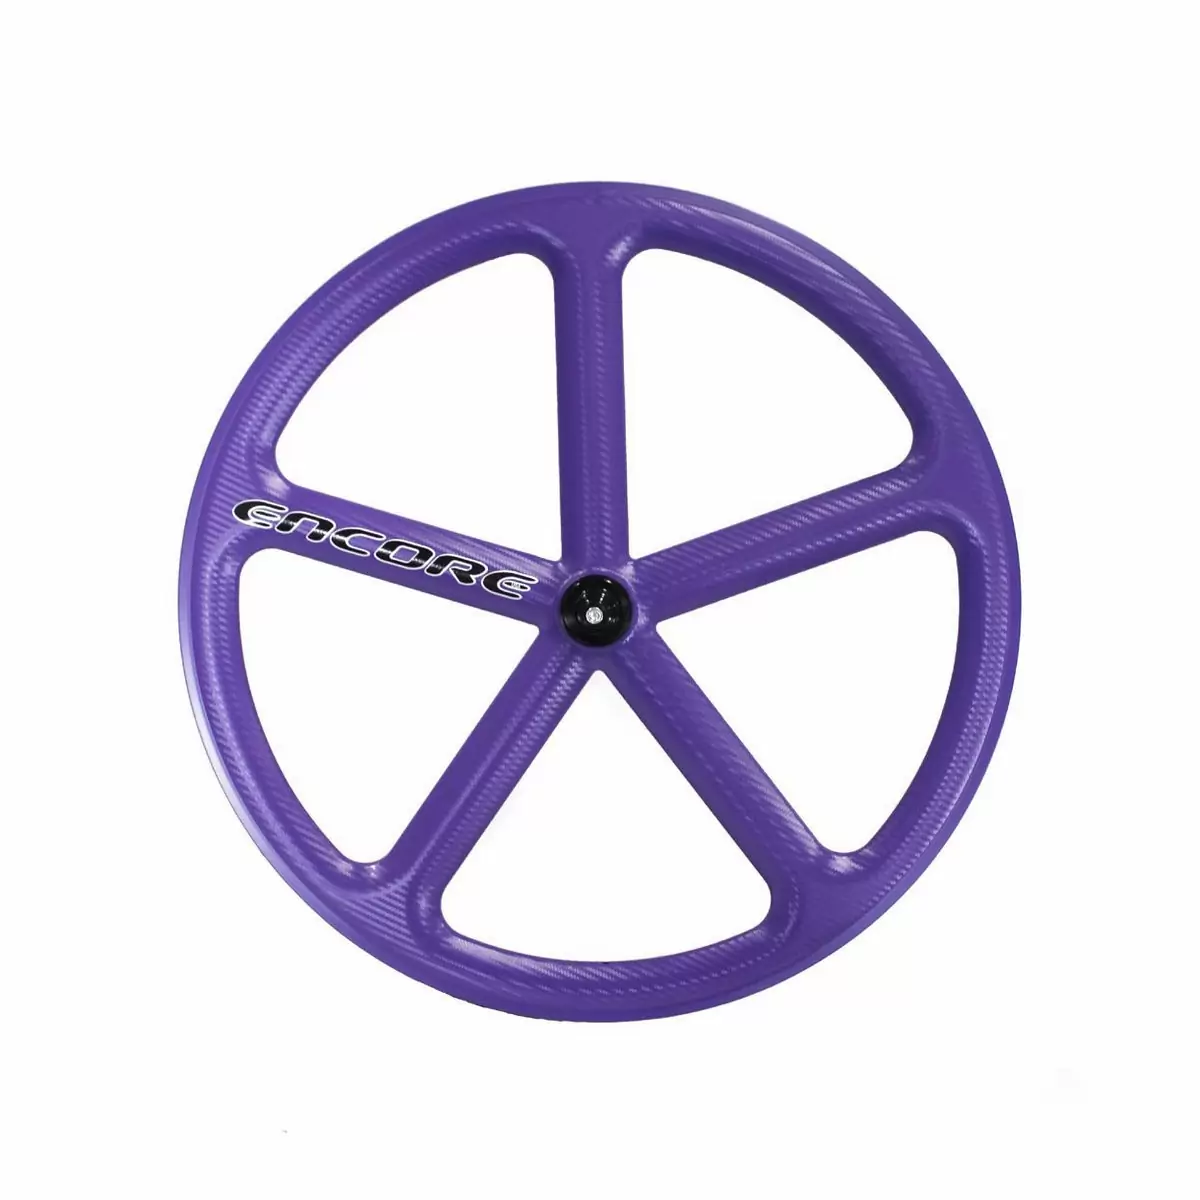 front wheel 700c track 5 spokes carbon weave purple nmsw - image